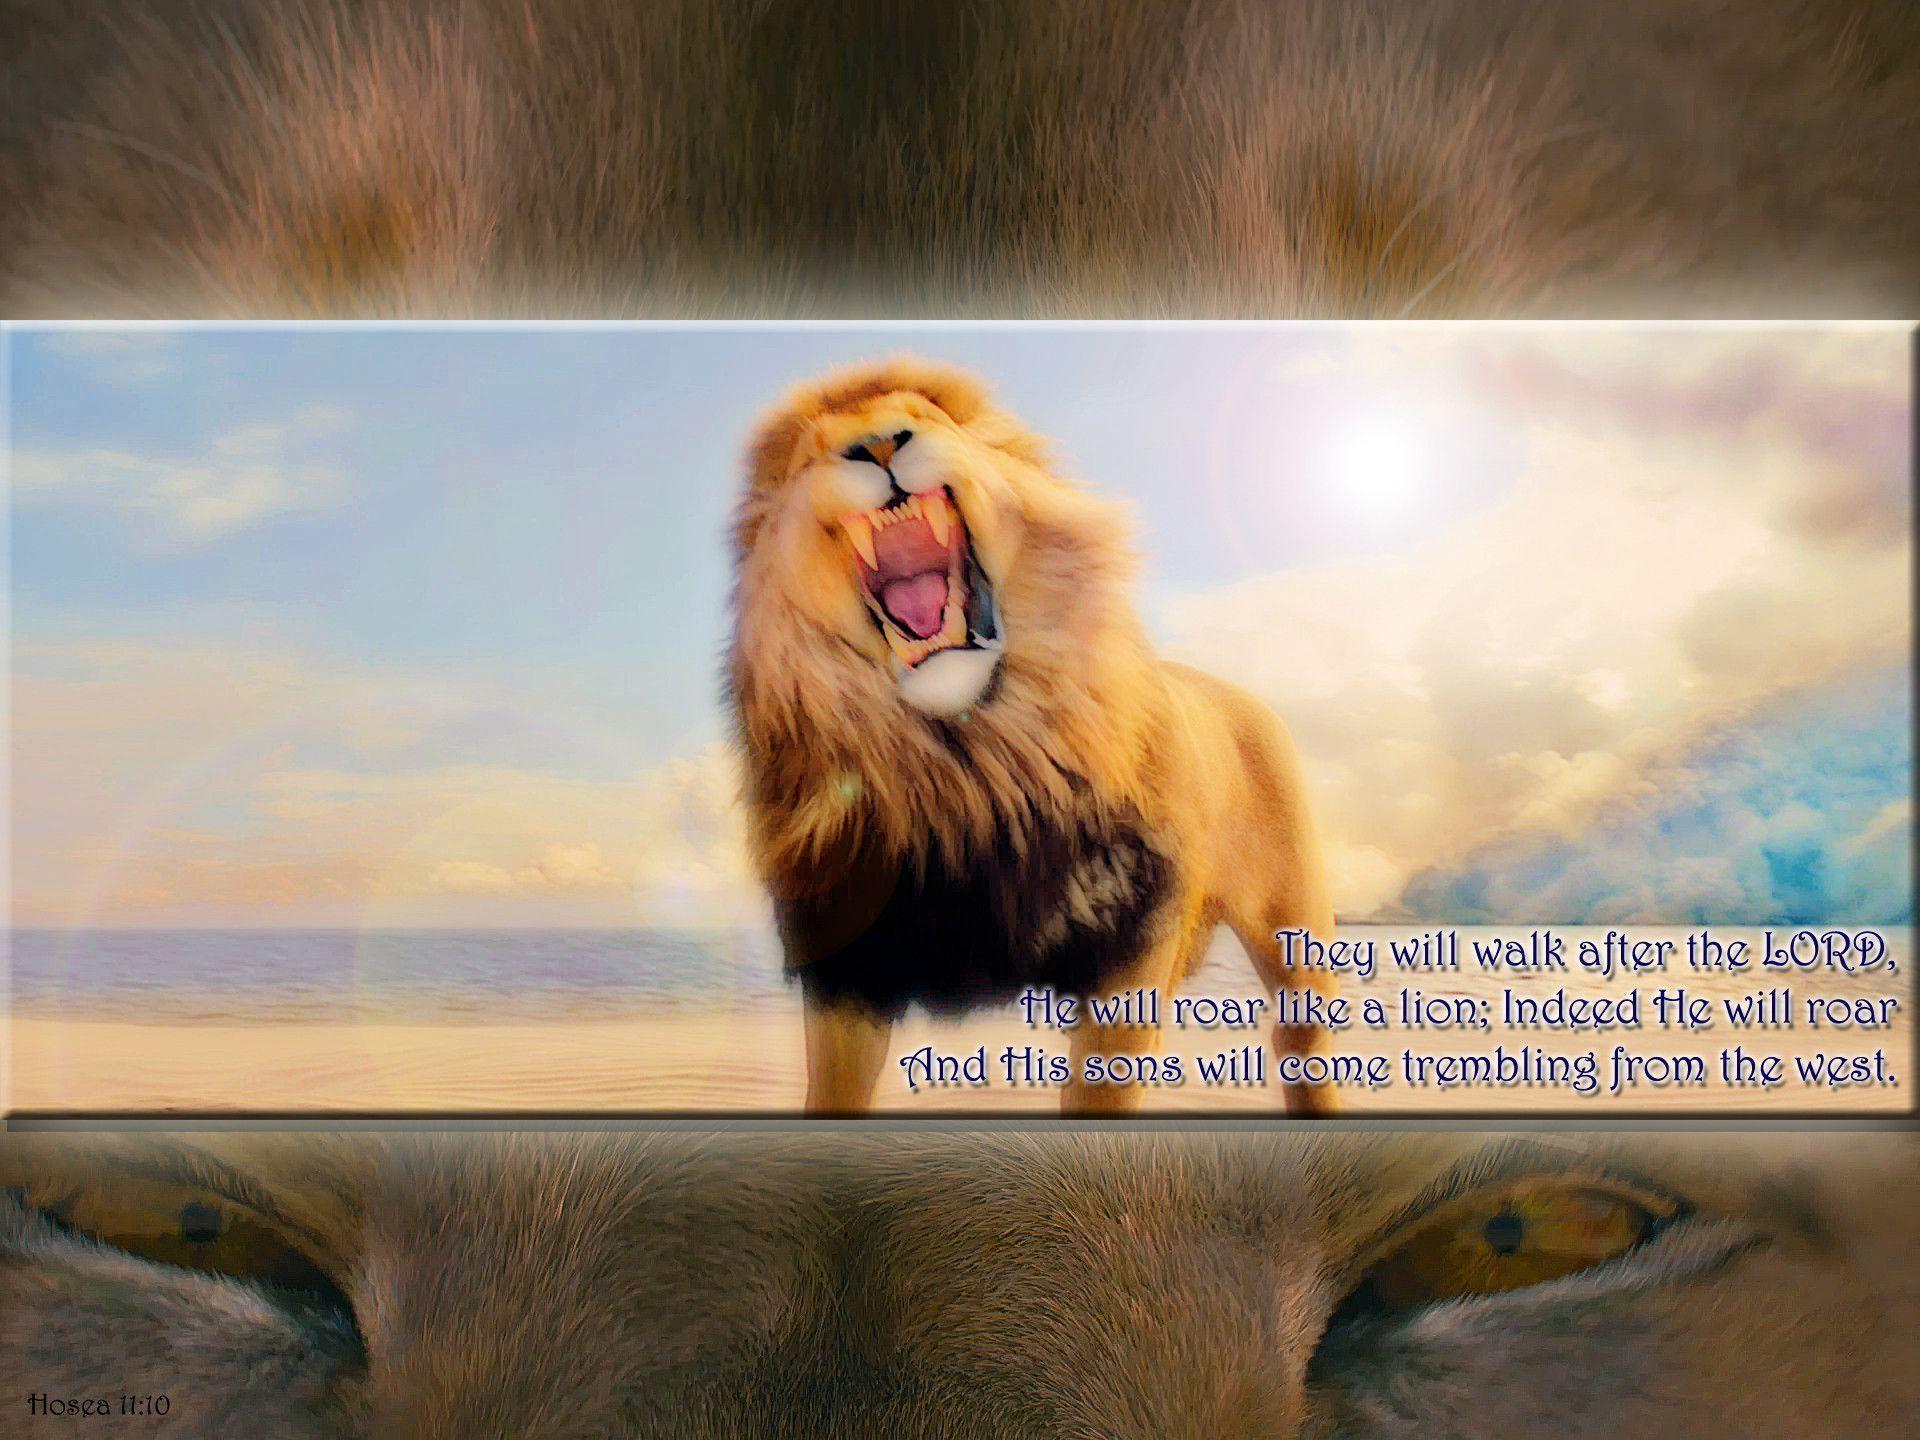 NarniaWeb Community Forums • View topic - "He will roar like a